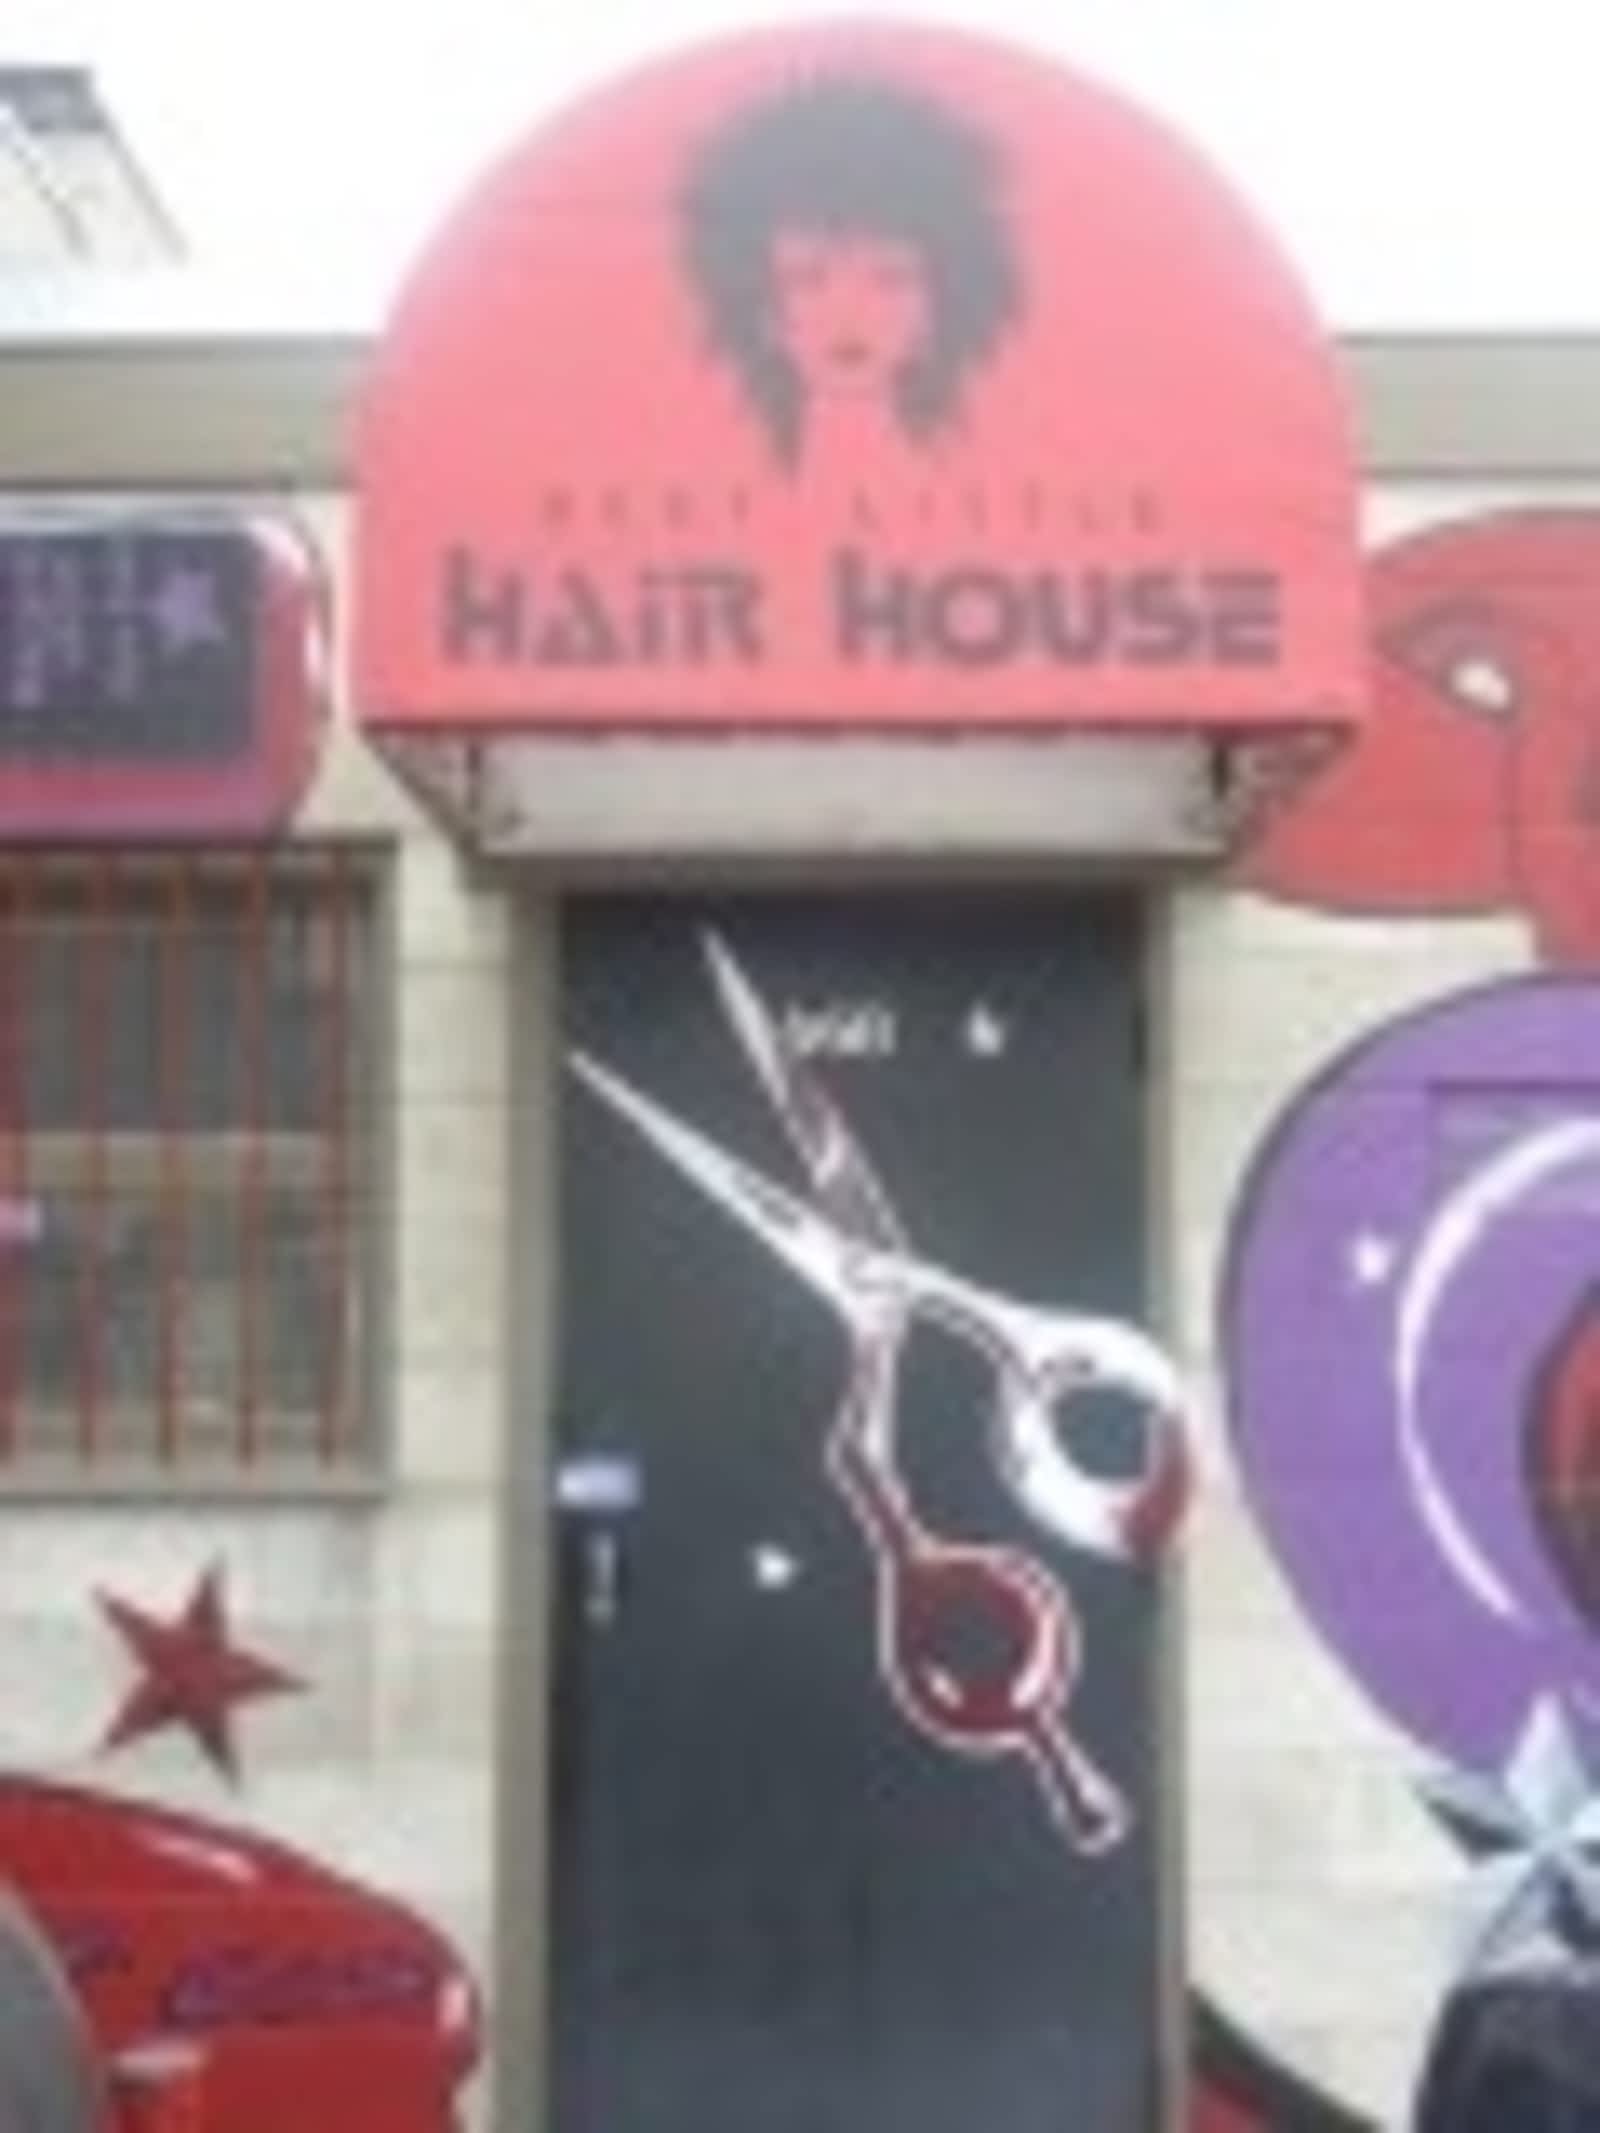 Best Little Hair House Opening Hours 468 Main St Penticton BC